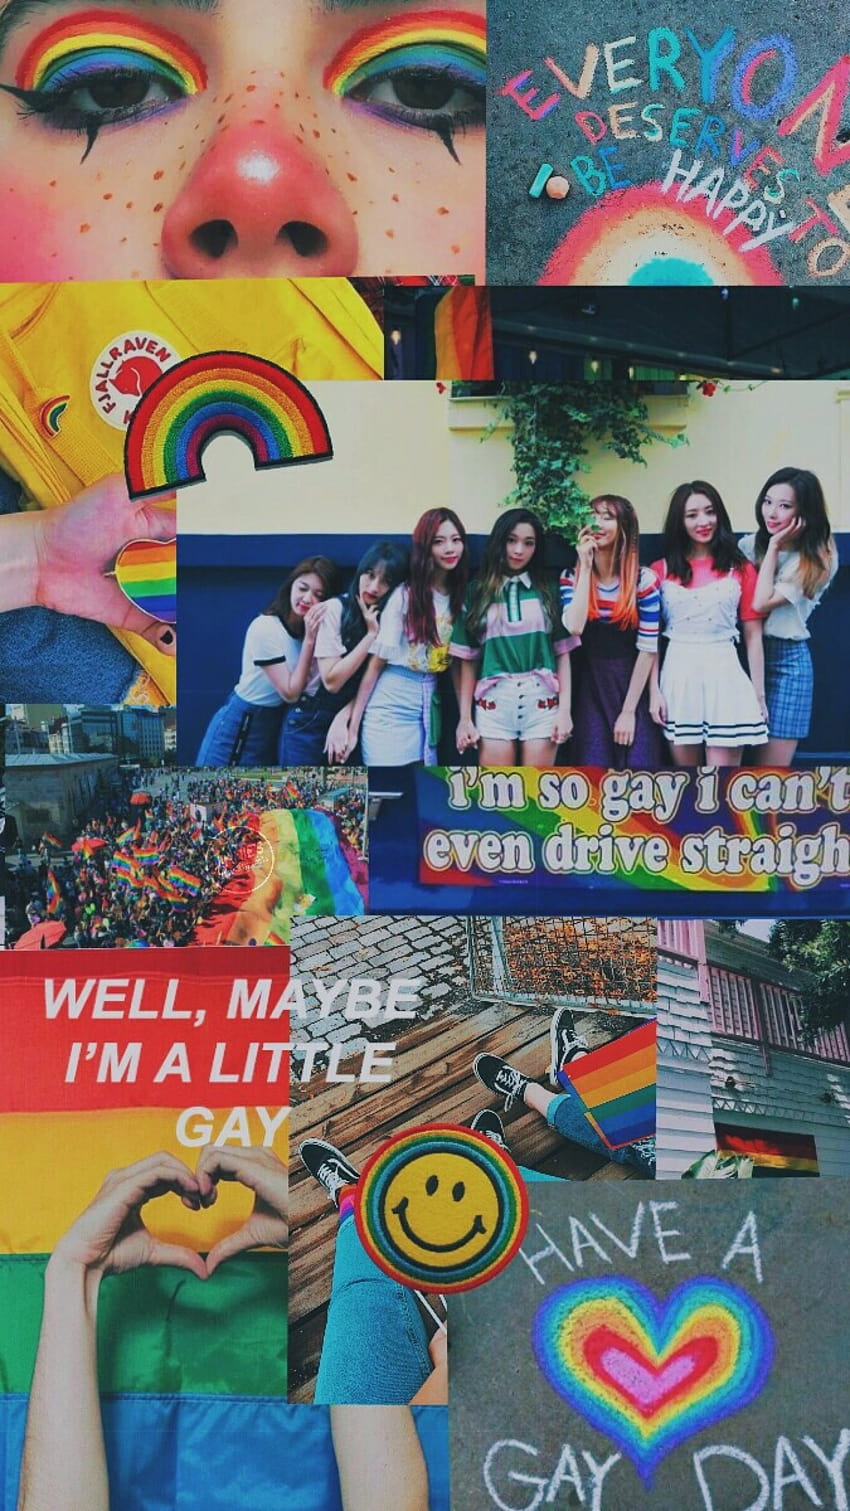 Collage of images and text celebrating pride month - Pride, gay